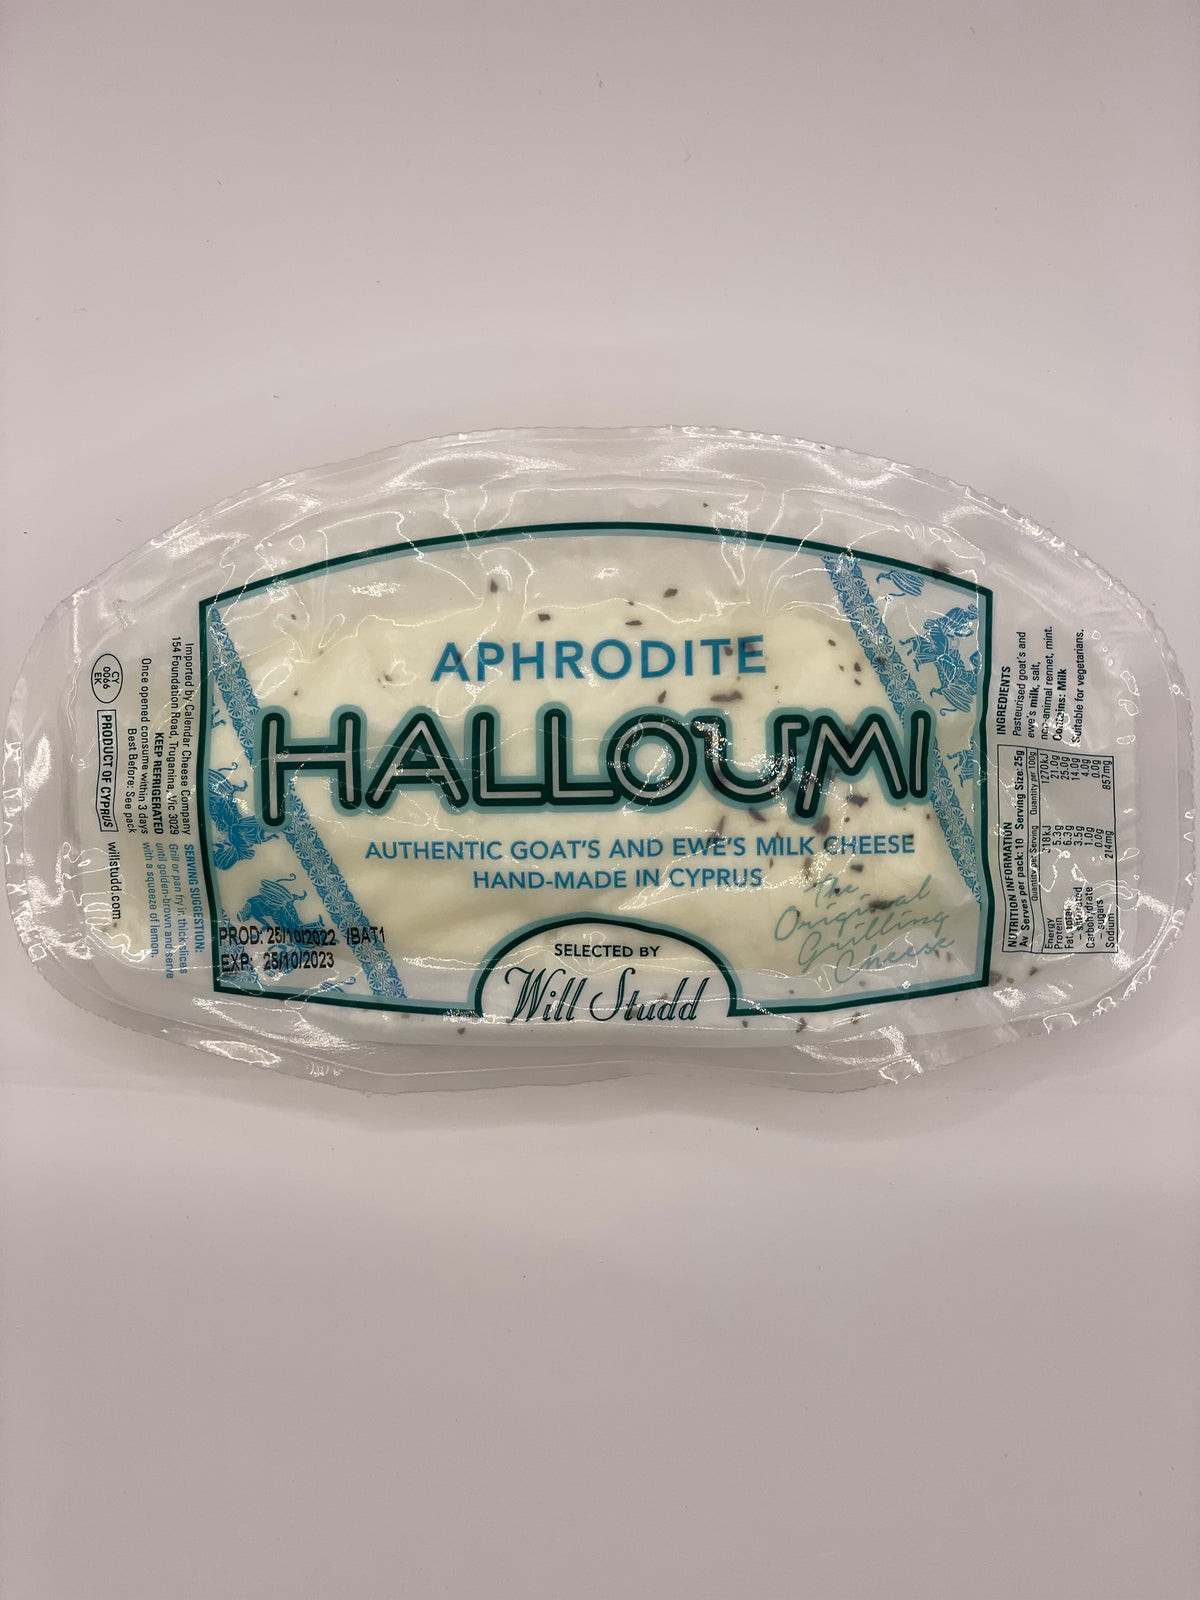 Aphrodite Halloumi - selected by Will Studd